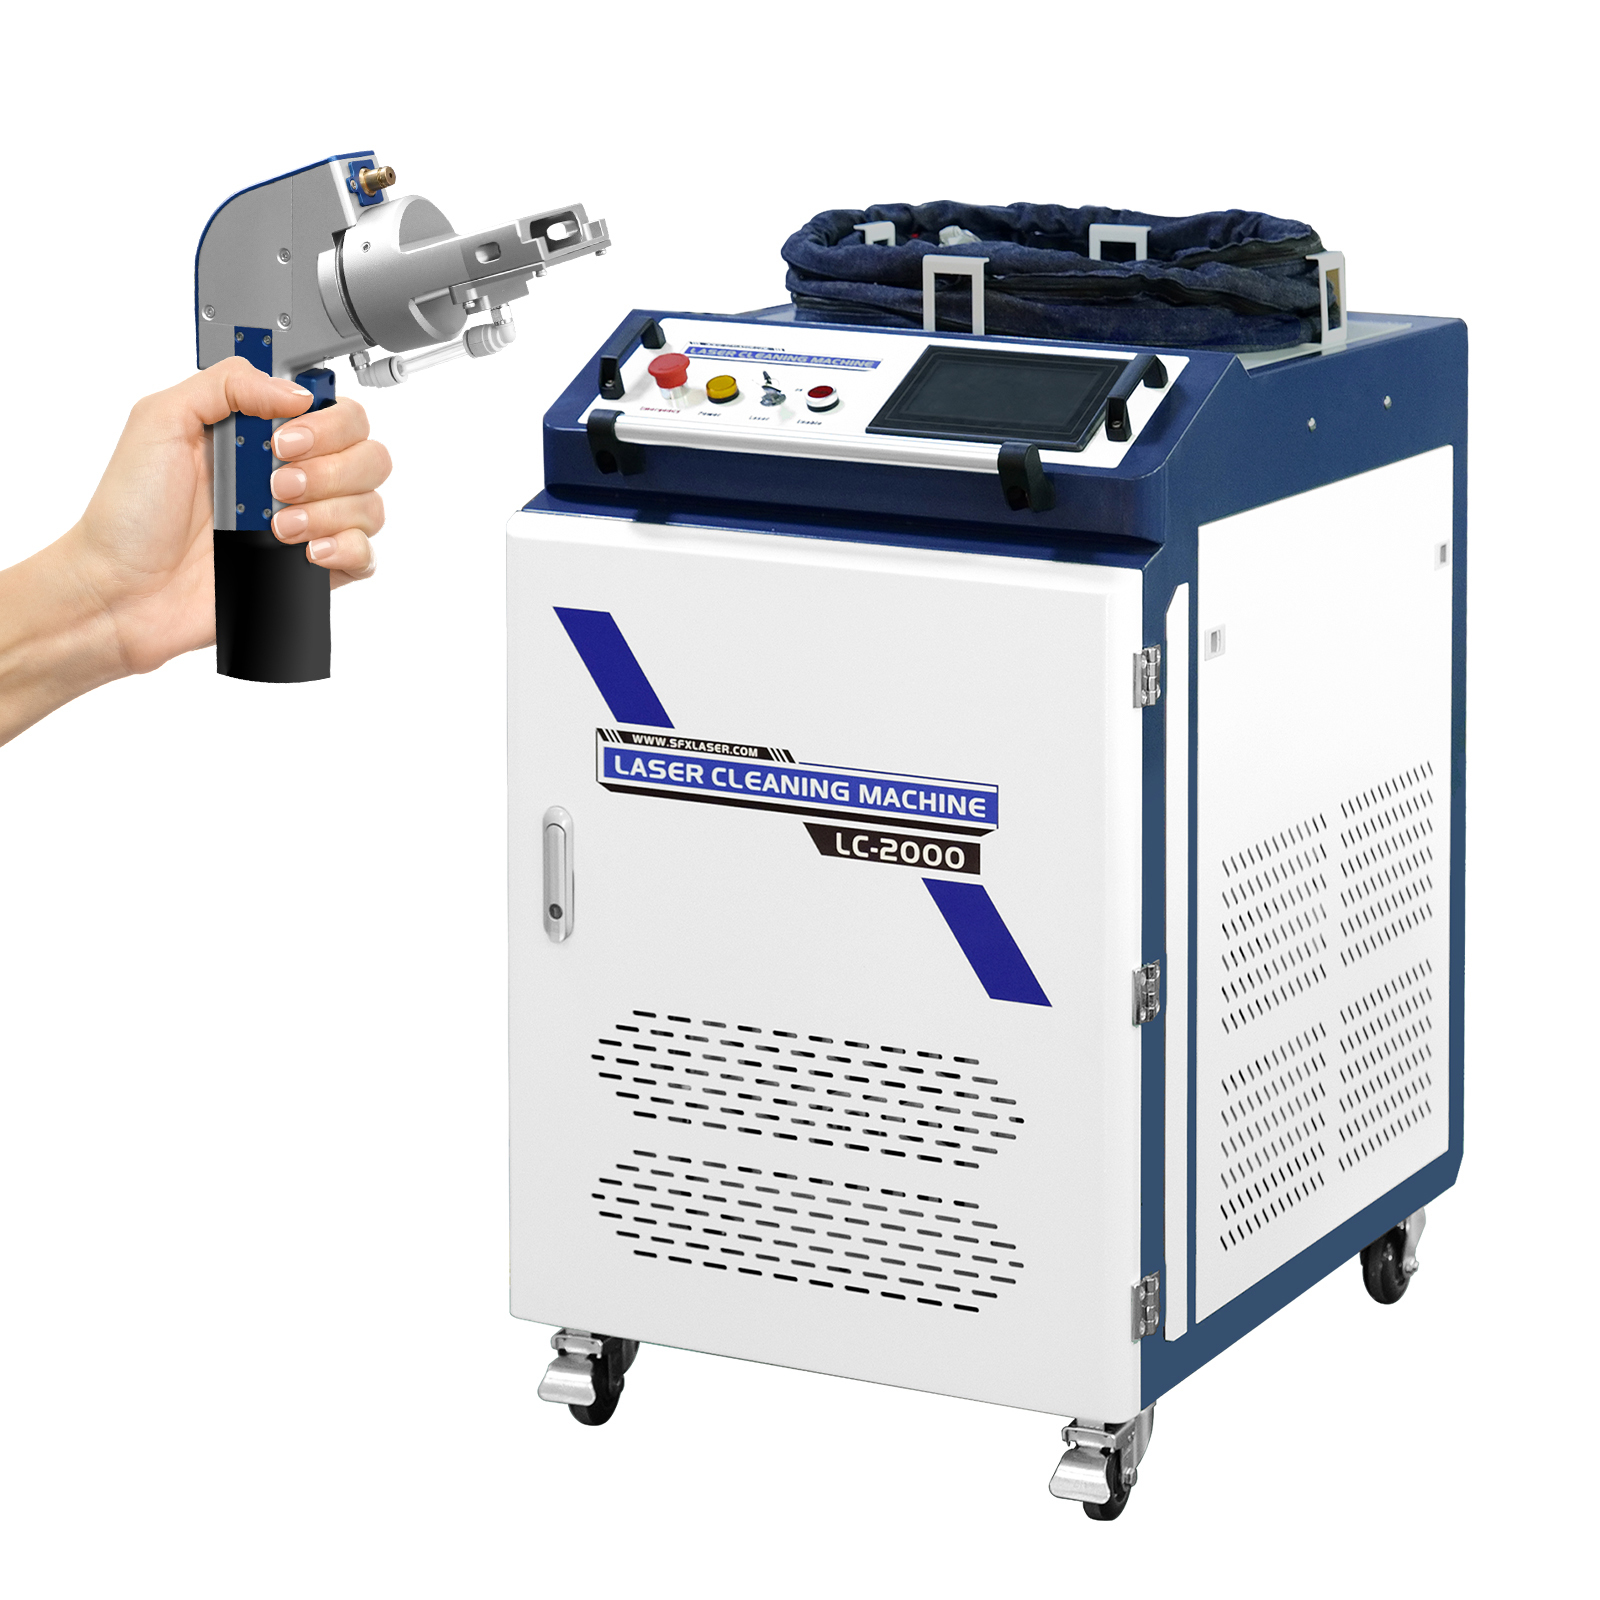 Rust removal cleaning machine - PE-100C - Perfect Laser Co., Ltd. (China) -  laser / manual / for the aerospace industry